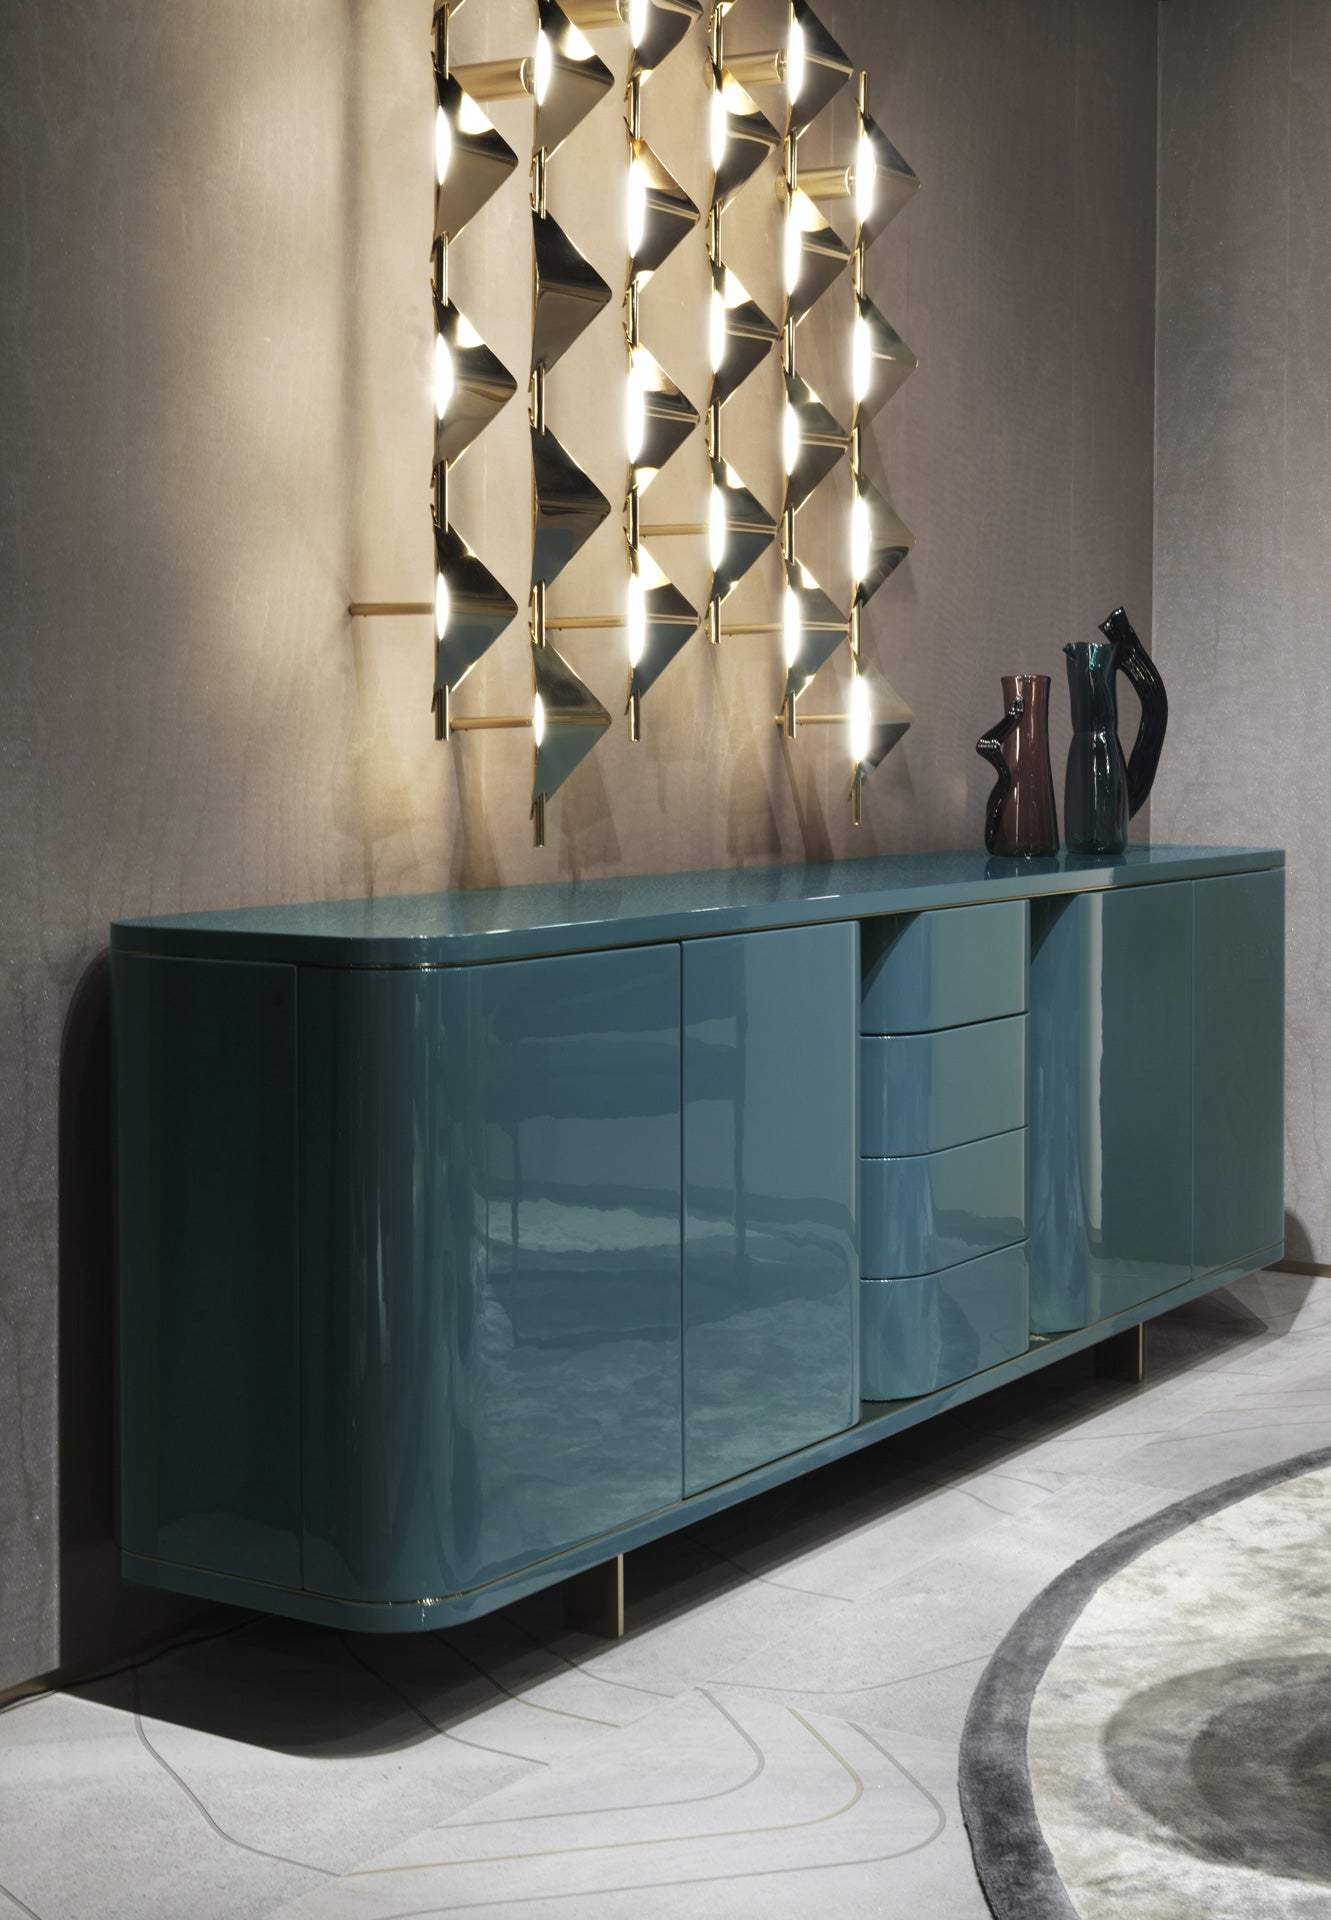 Visionnaire Donegal Sideboard